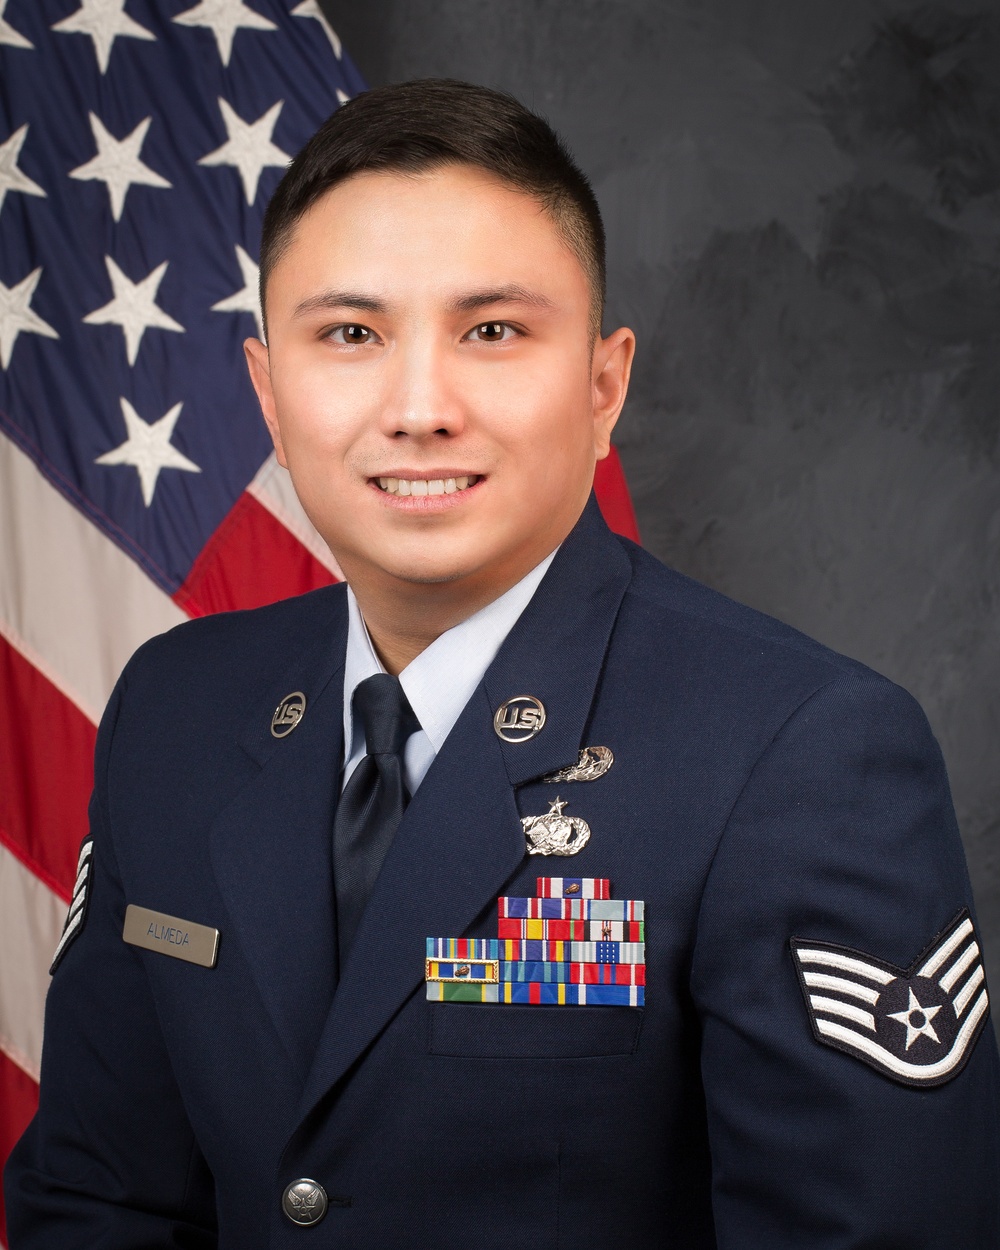 Official portrait of US Air Force Staff Sgt. Christian B. Almeda, 707th Communications Squadron